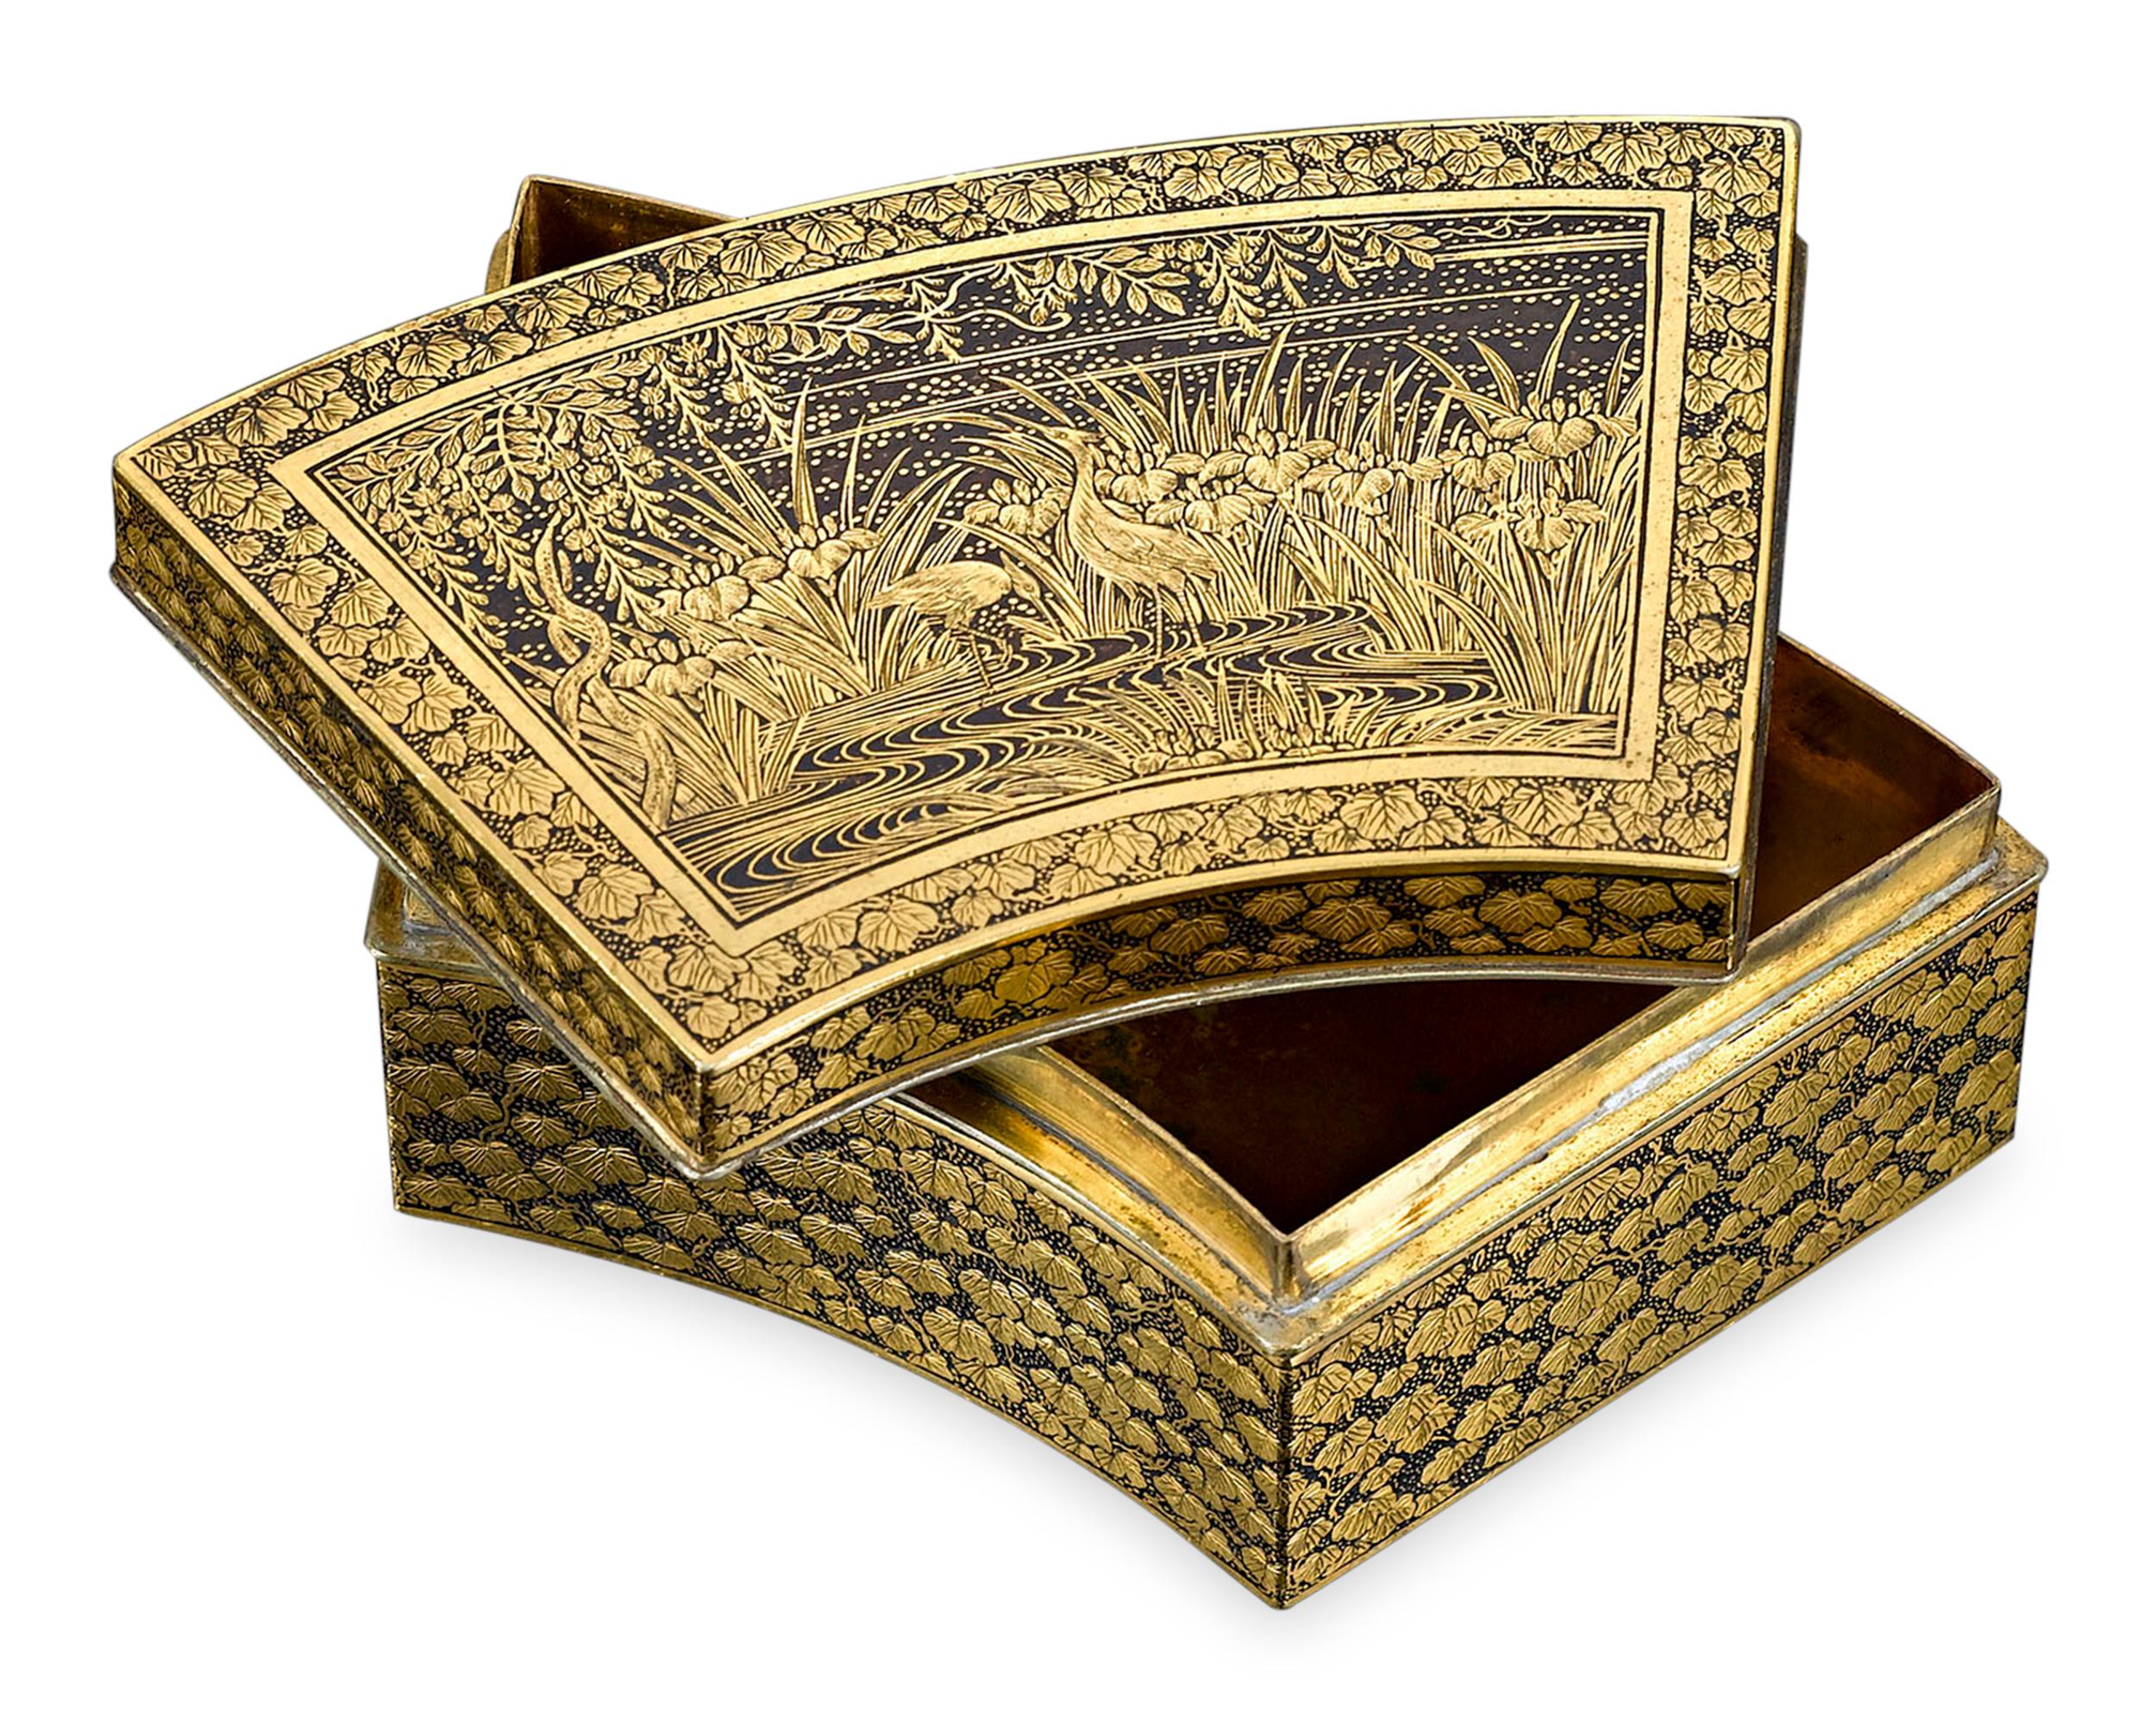 This rare and beautiful Japanese box exhibits a superb level of enamel artistry and craftsmanship. Formed in an elegant fan shape, this exquisite container is adorned with intricate engraving on every surface, highlighted by contrasting enamel